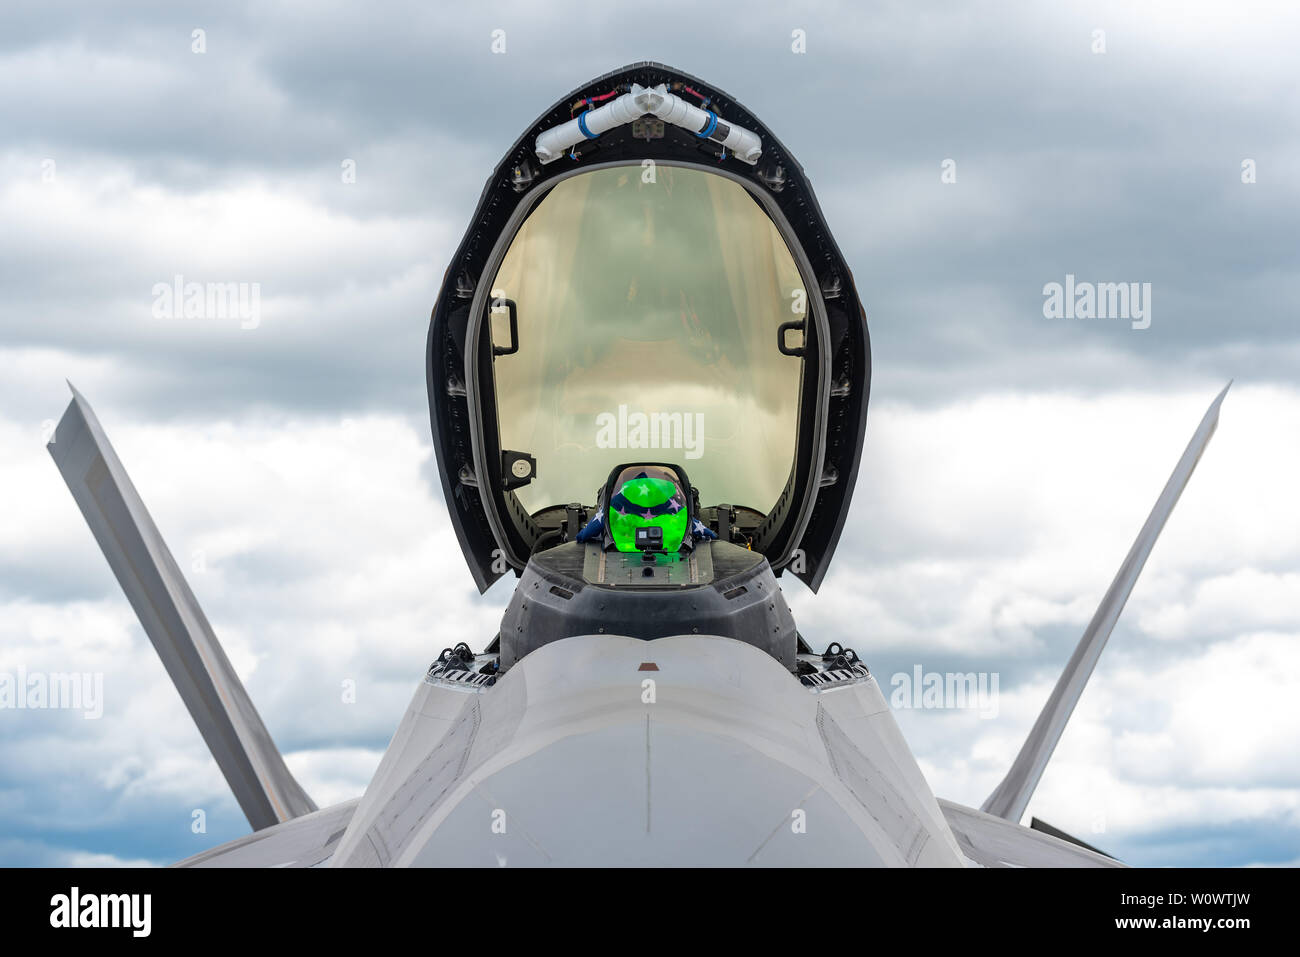 The F-22 Raptor sits on display before performing an aerial demonstration at the SkyFest air show in Spokane, Wash., June 22, 2019. Representing the U.S. Air Force and Air Combat Command, the F-22 Demo Team travels to 25 air shows a season to showcase the performance and capabilities of the world's premier 5th-generation fighter. (U.S. Air Force photo by 2nd Lt. Samuel Eckholm) Stock Photo